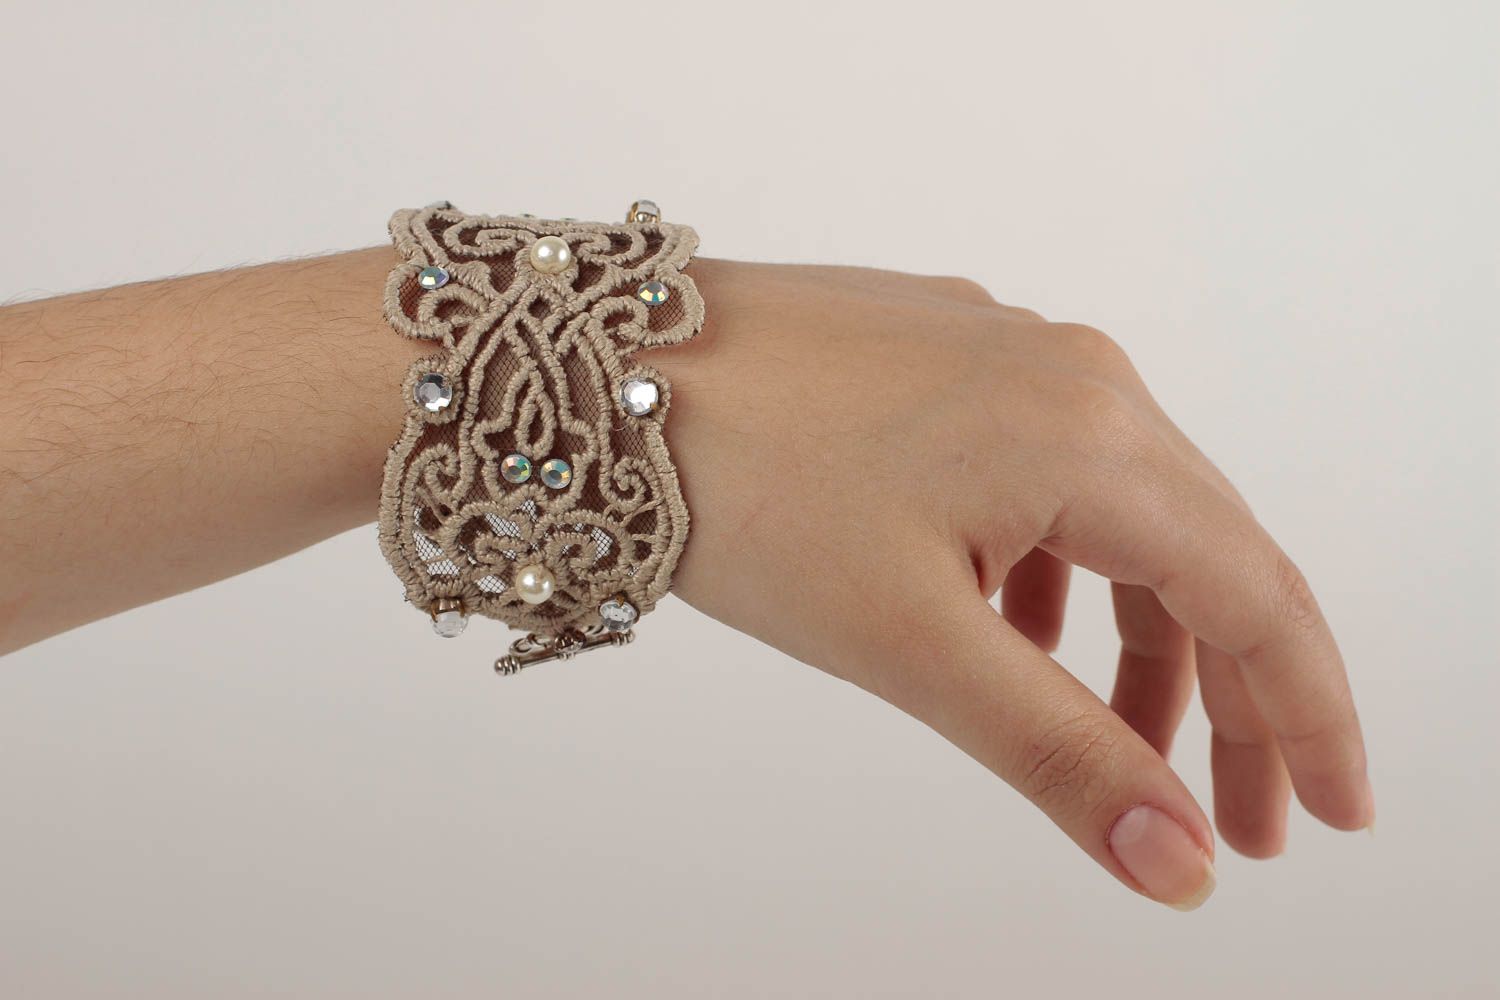 Handcrafted jewelry wrist bracelet lace bracelet unique jewelry gifts for ladies photo 1